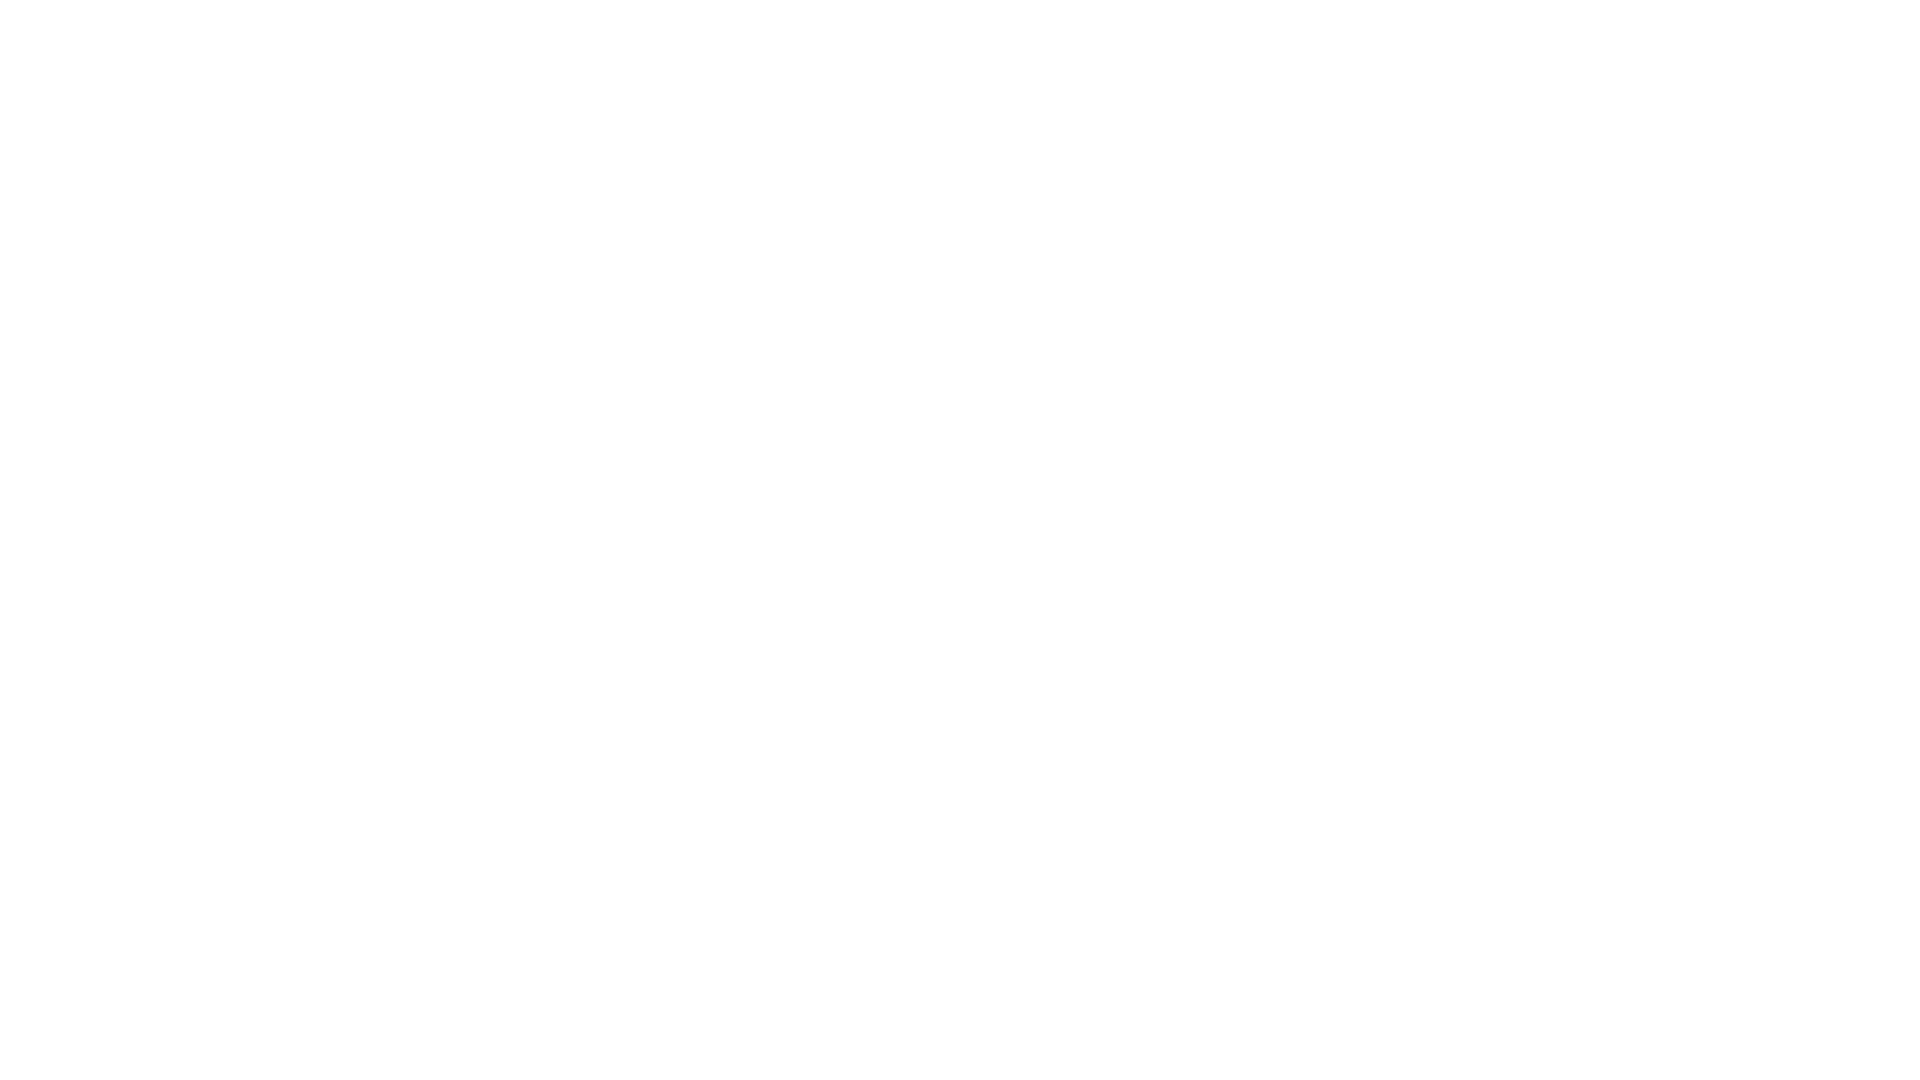 michael weber art music and passion jahnkedesign 2017